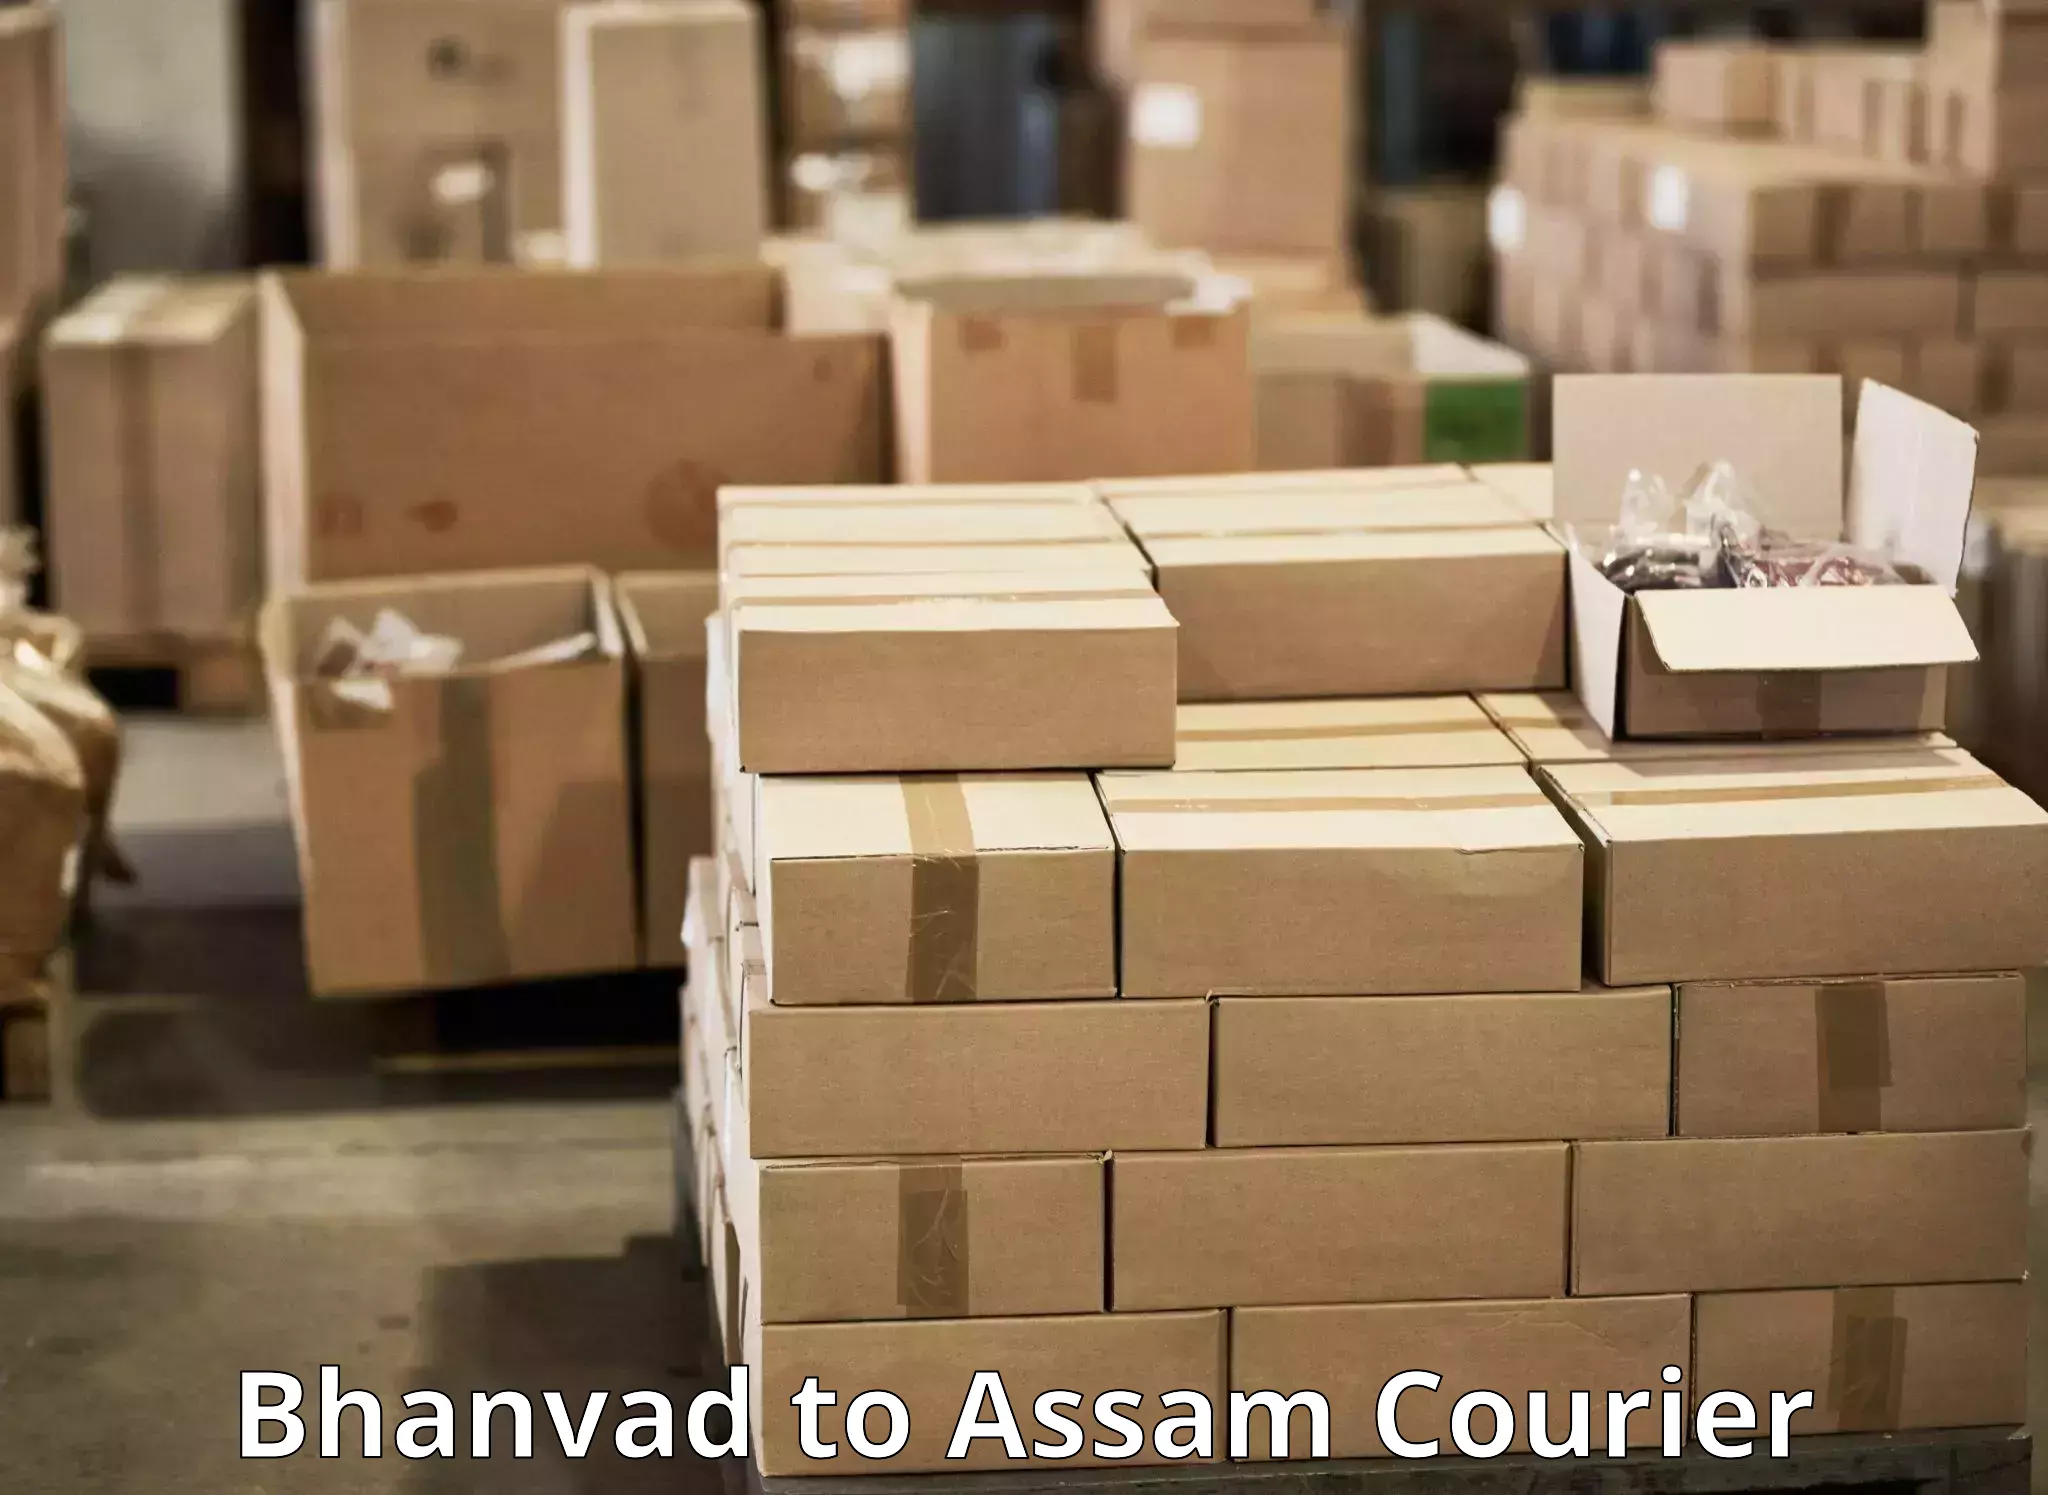 Online shipping calculator Bhanvad to Assam